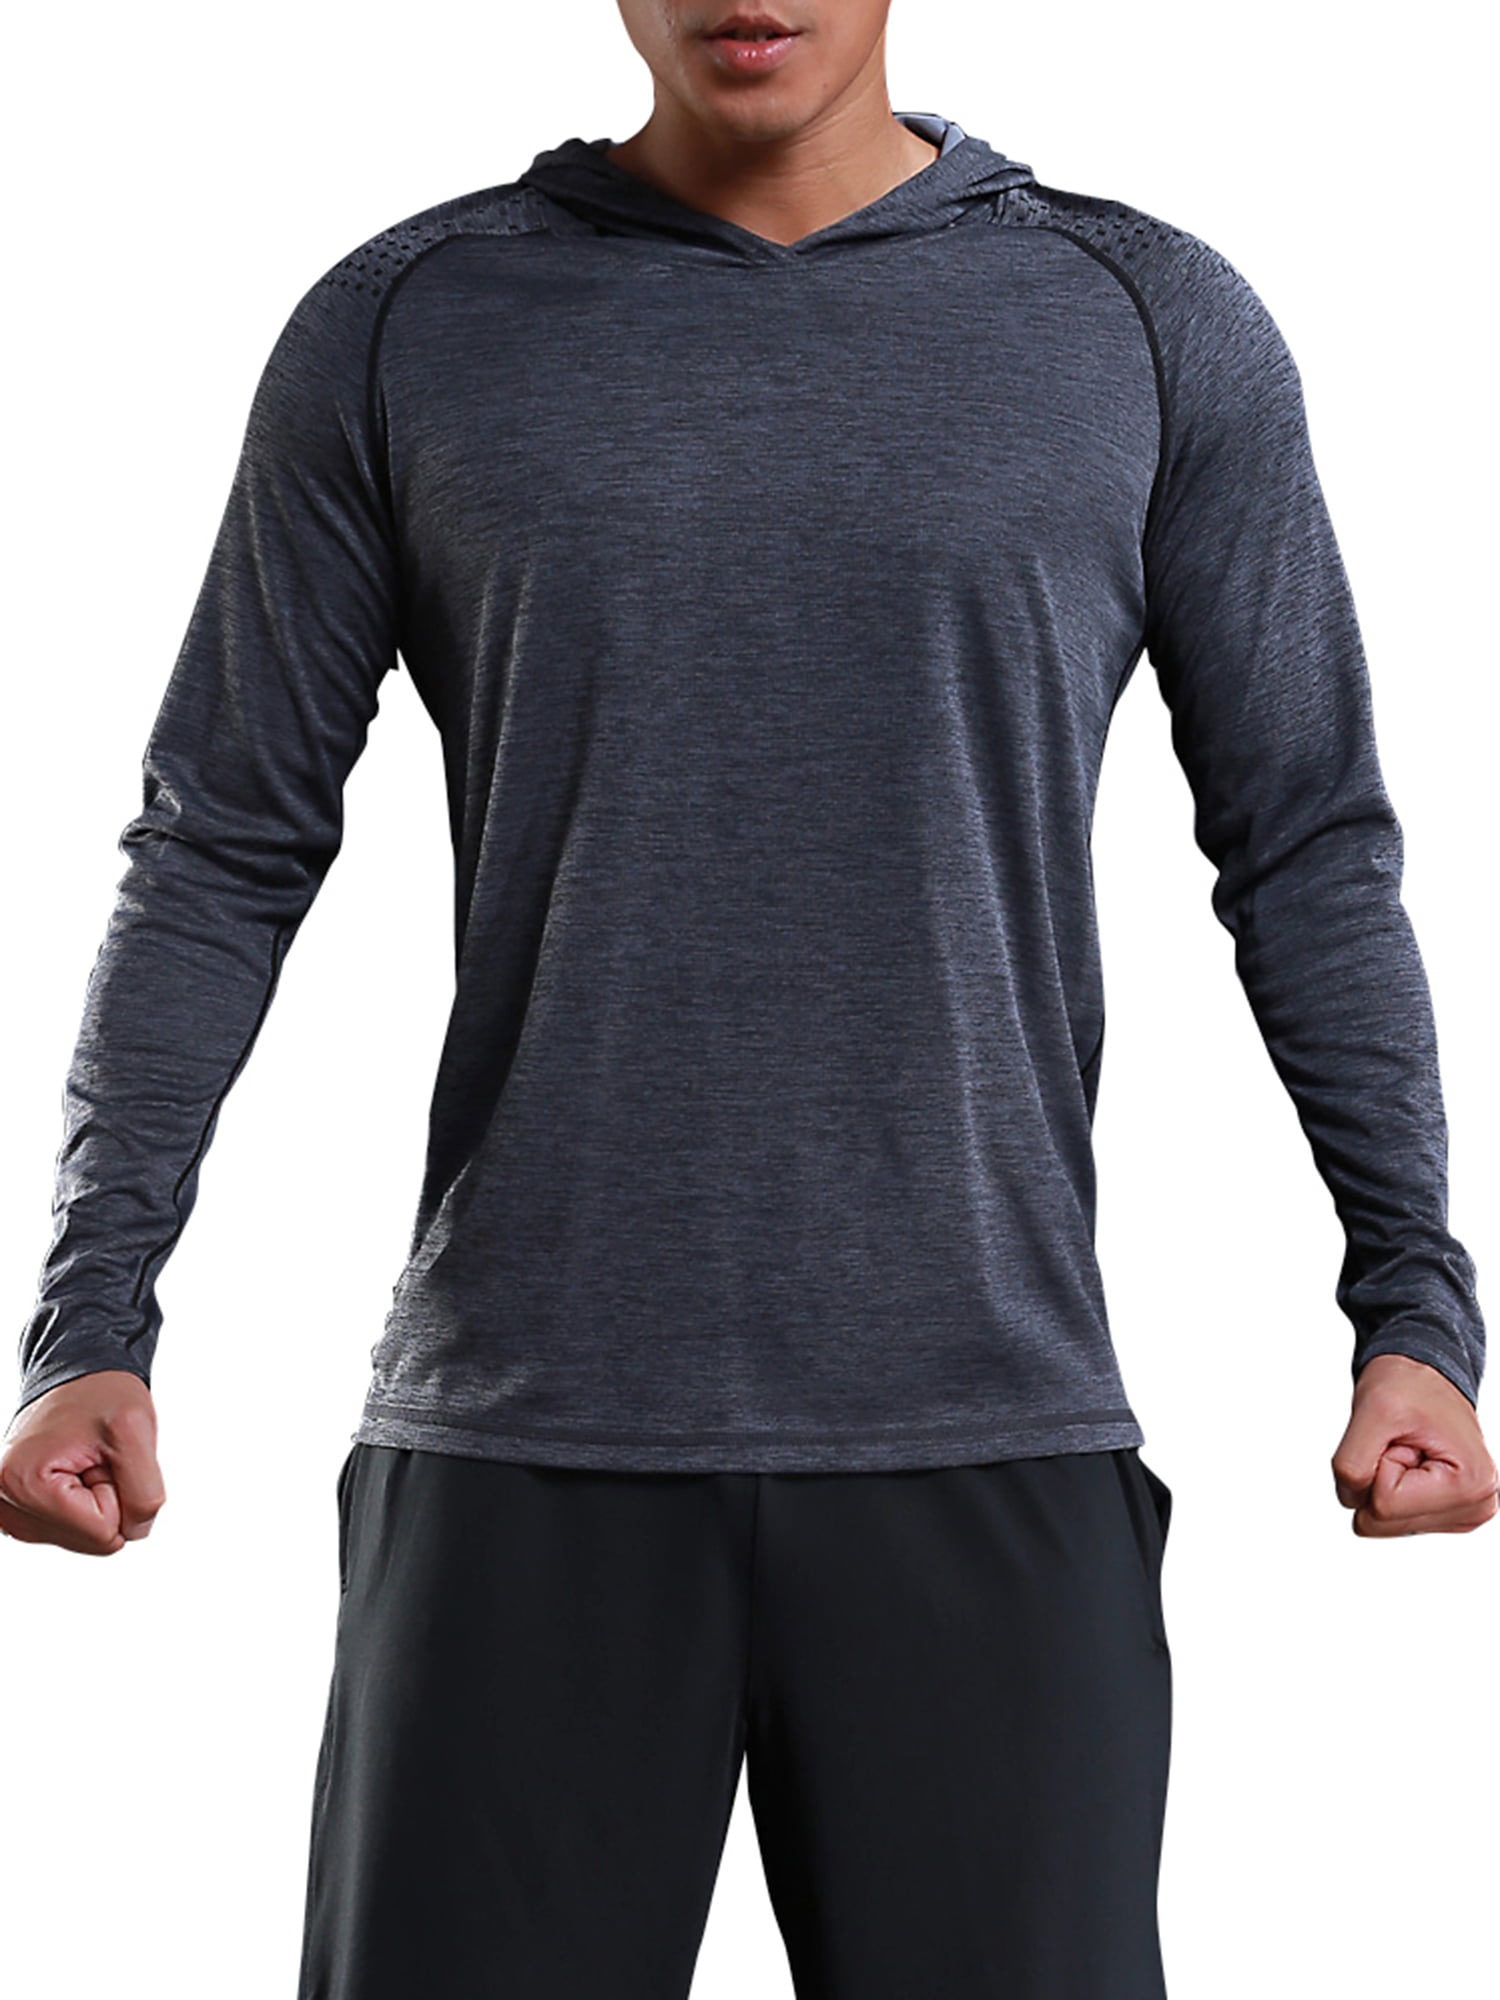 Mens Long Sleeve Active Sports Shirts With Hooded Performance ...